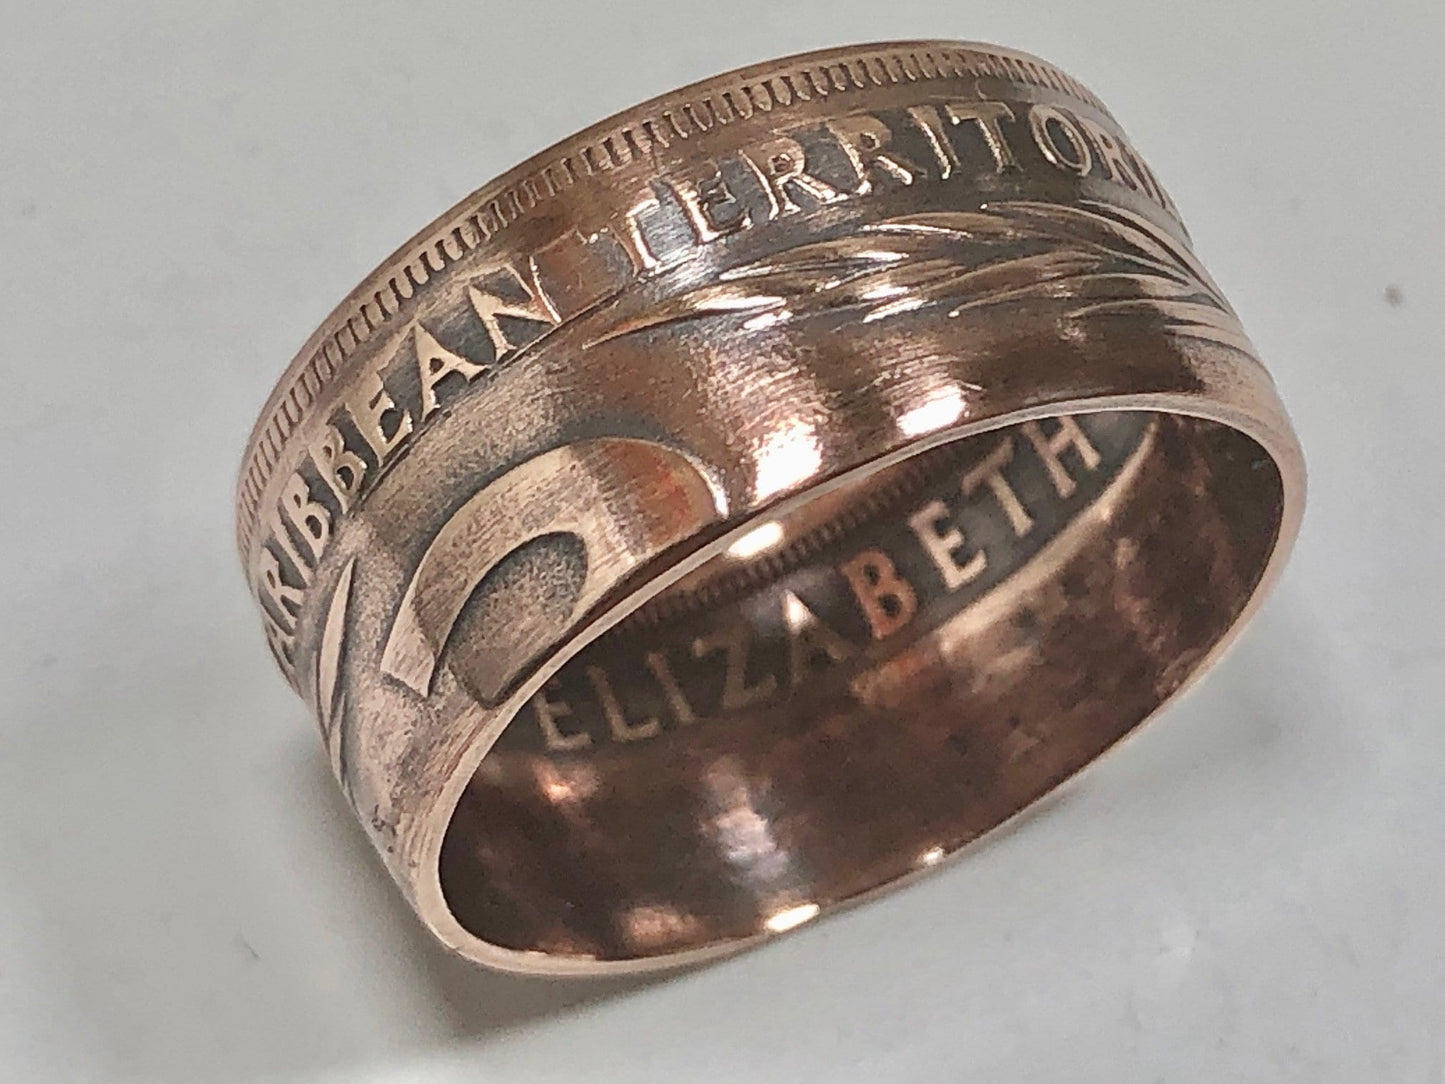 Eastern Caribbean Coin Ring 2 Cent Handmade Personal Jewelry Ring Gift For Friend Coin Ring Gift For Him Her World Coin Collector